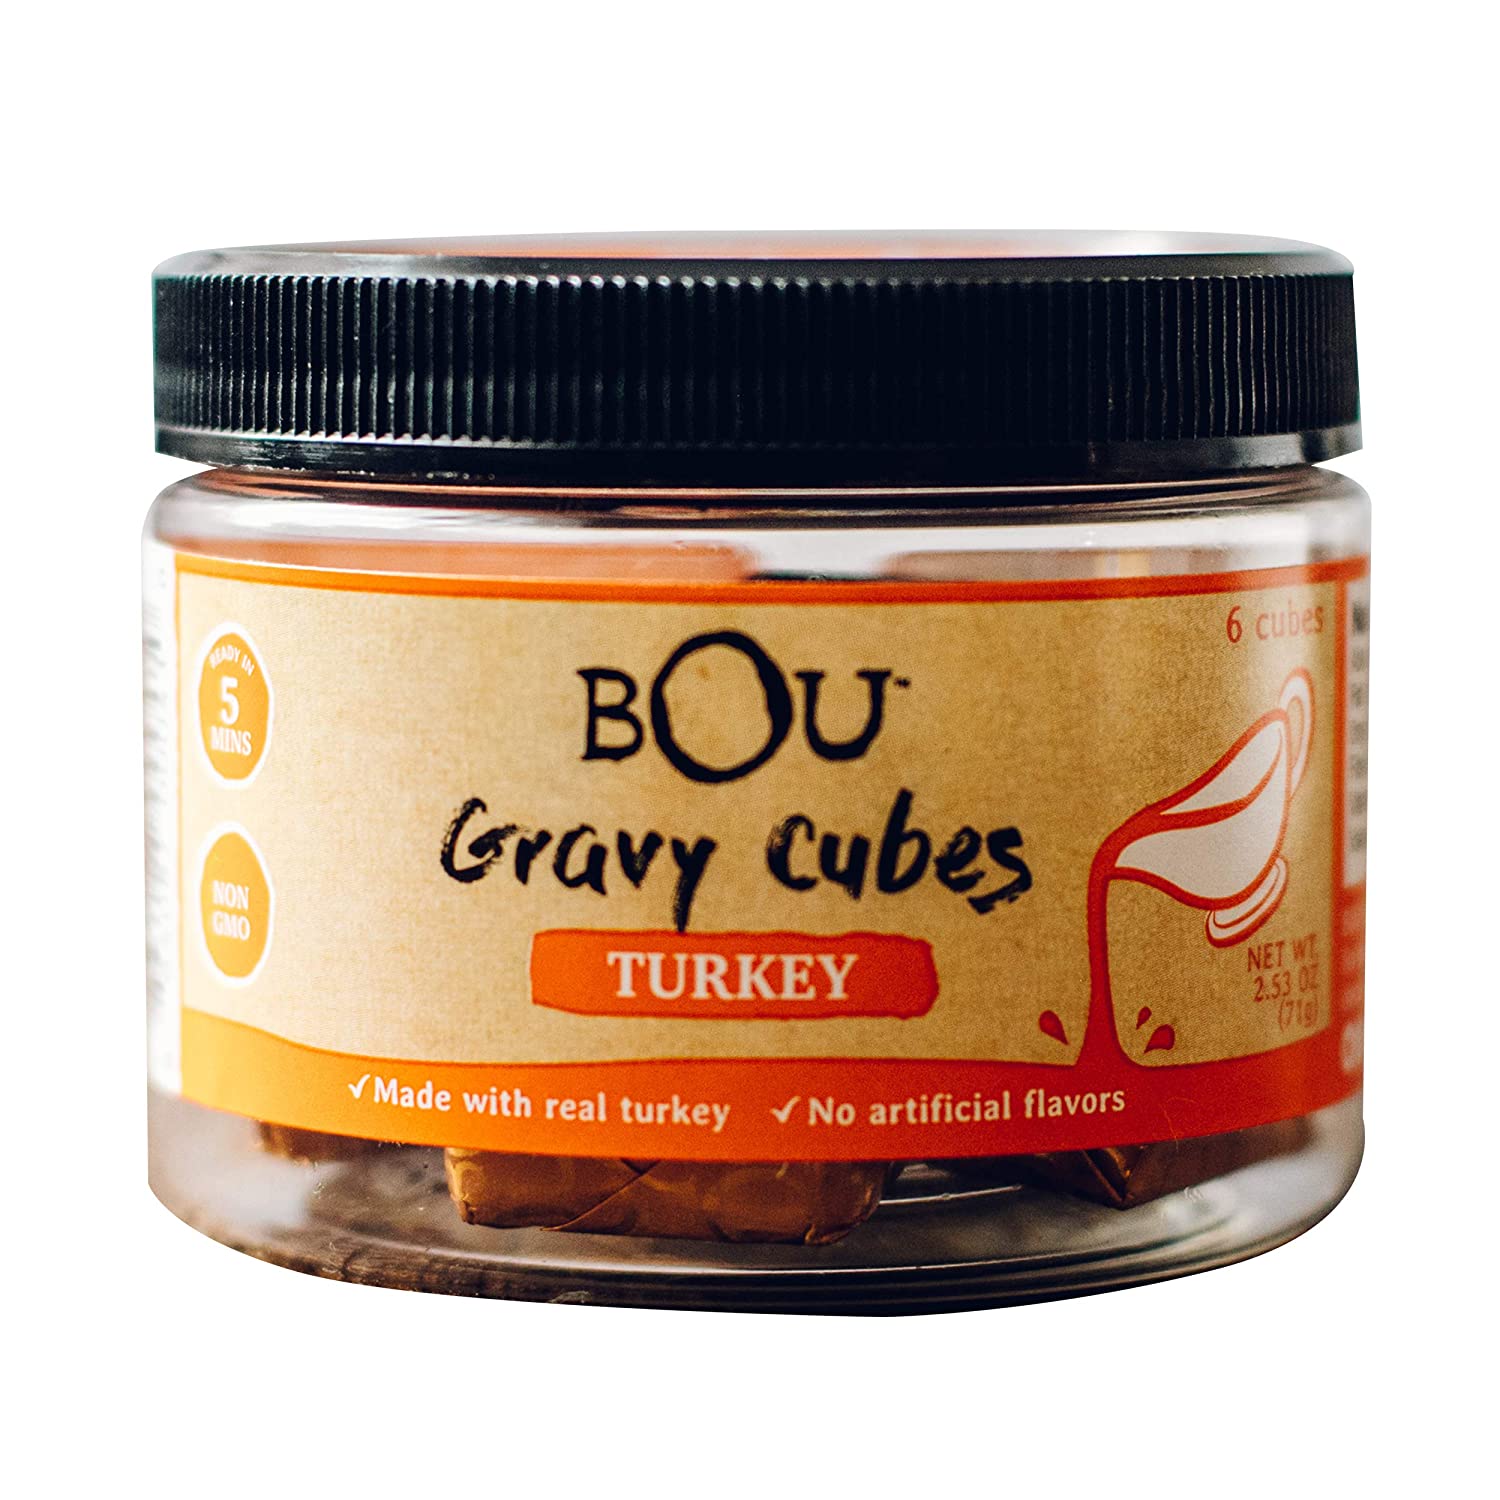 Amazon: BOU Turkey Gravy Cubes (Bouillon), Real Turkey, No Artificial Flavors, 2.53 Oz, Pack of 6, Lowest Ever, Free Prime Shipping $7.38